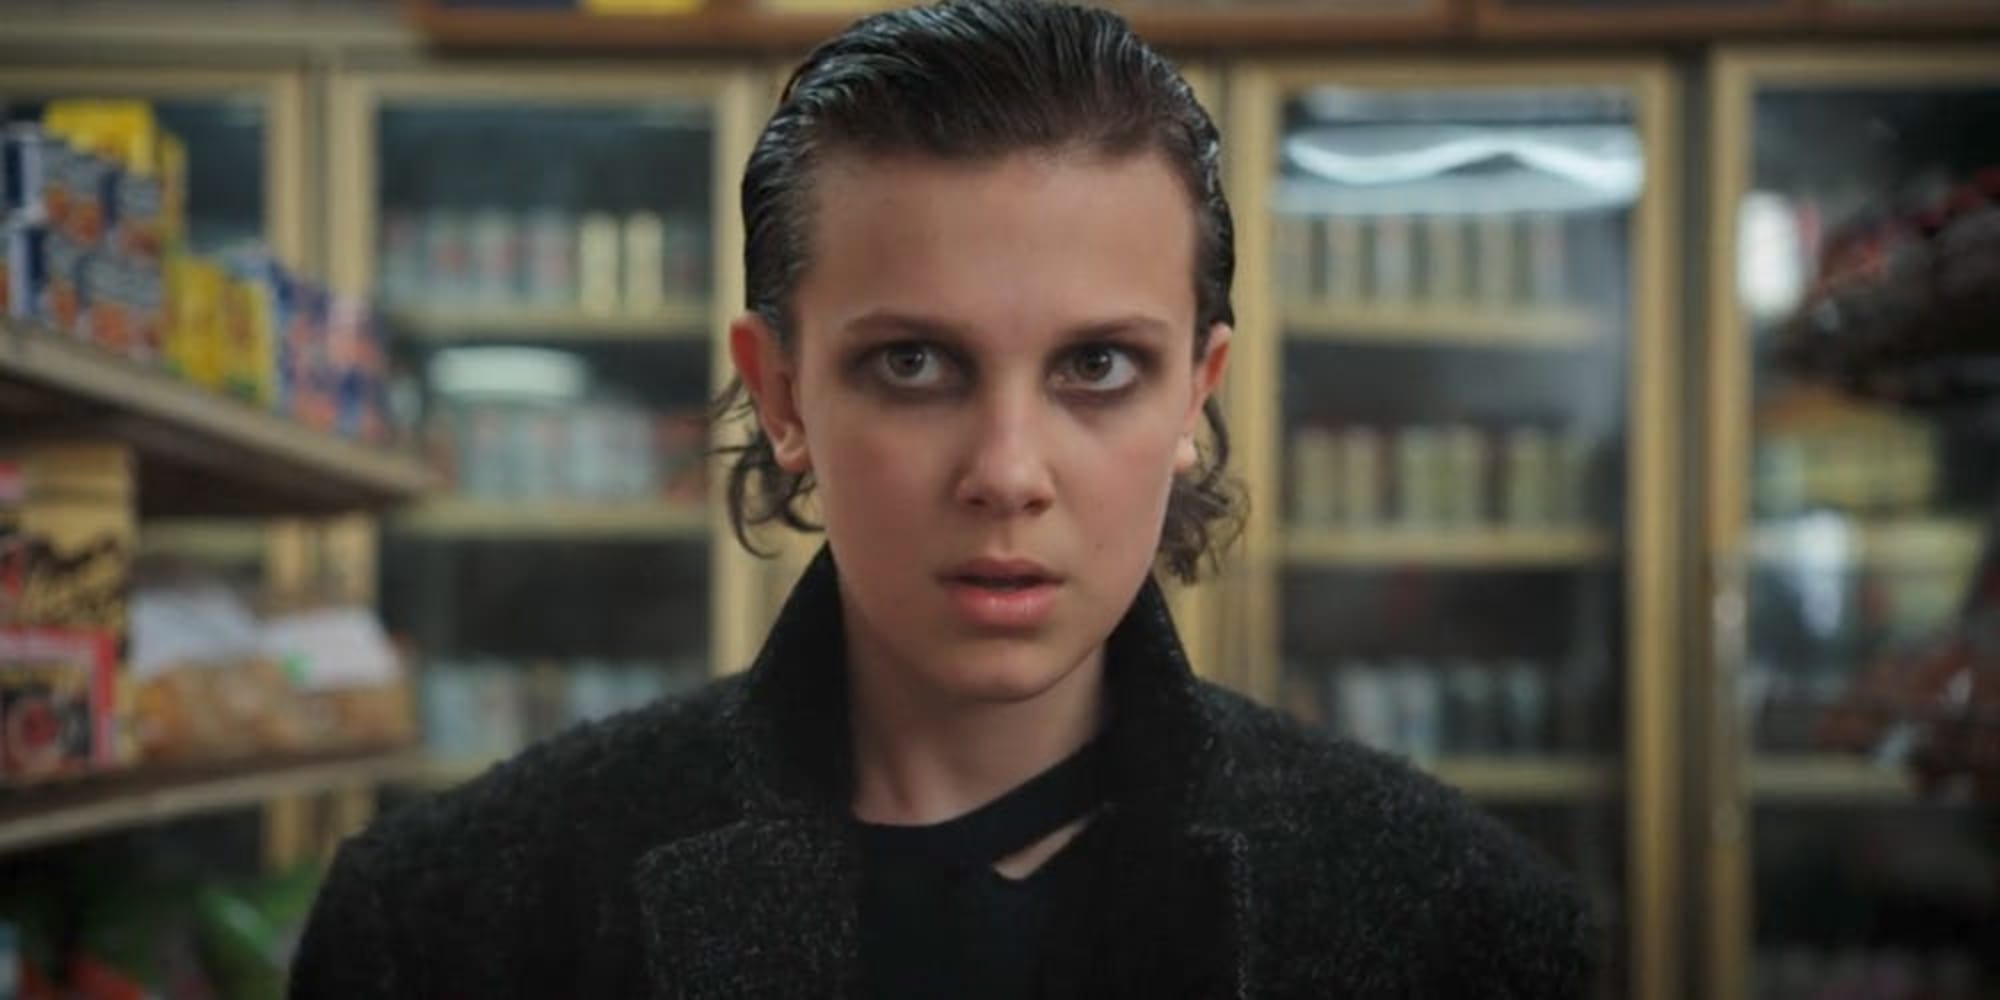 Top 11 'Stranger Things' Moments From Eleven (Millie Bobby Brown